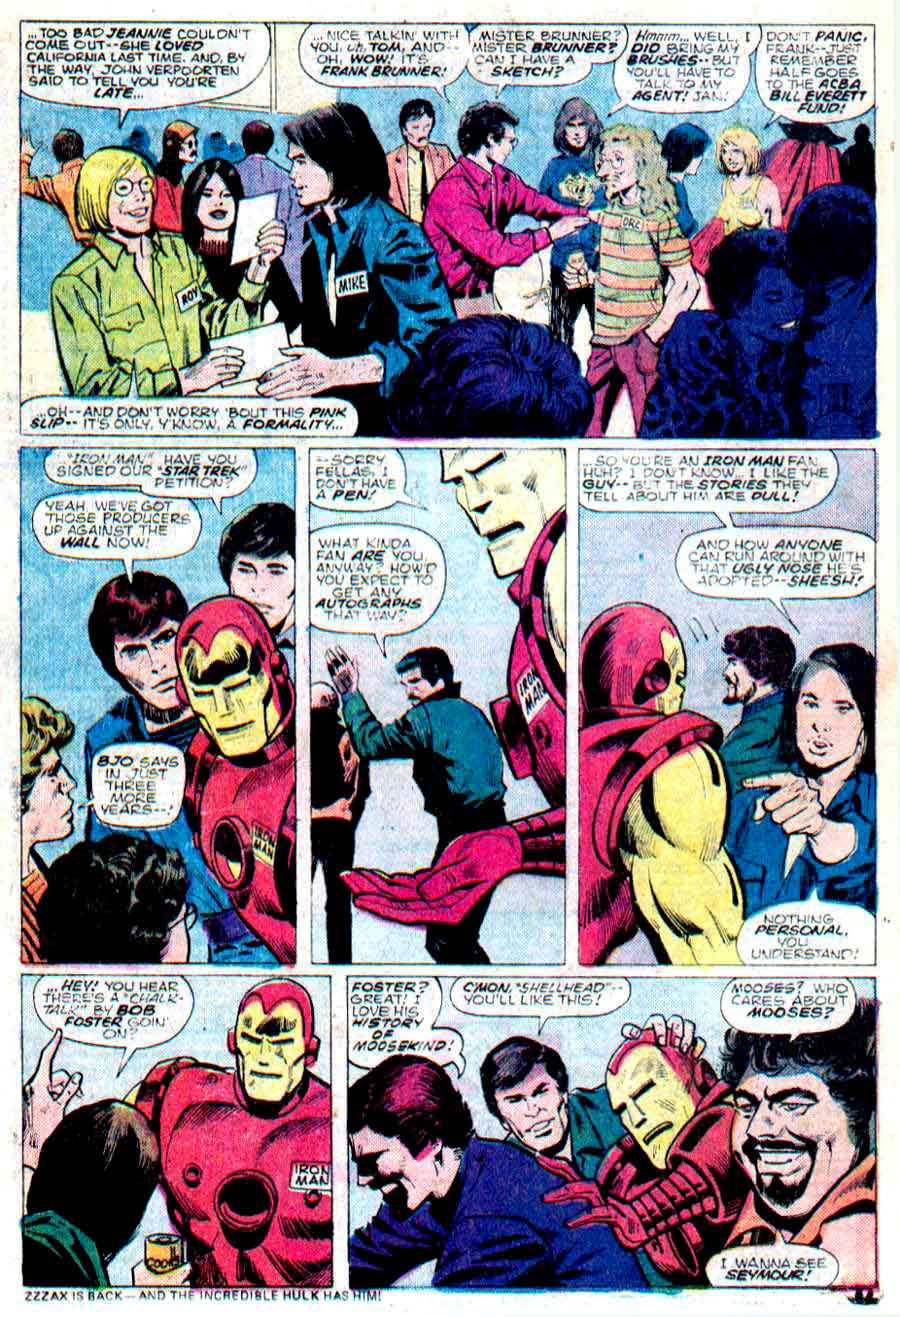 Iron Man v1 #72 marvel comic book page art by Neal Adams